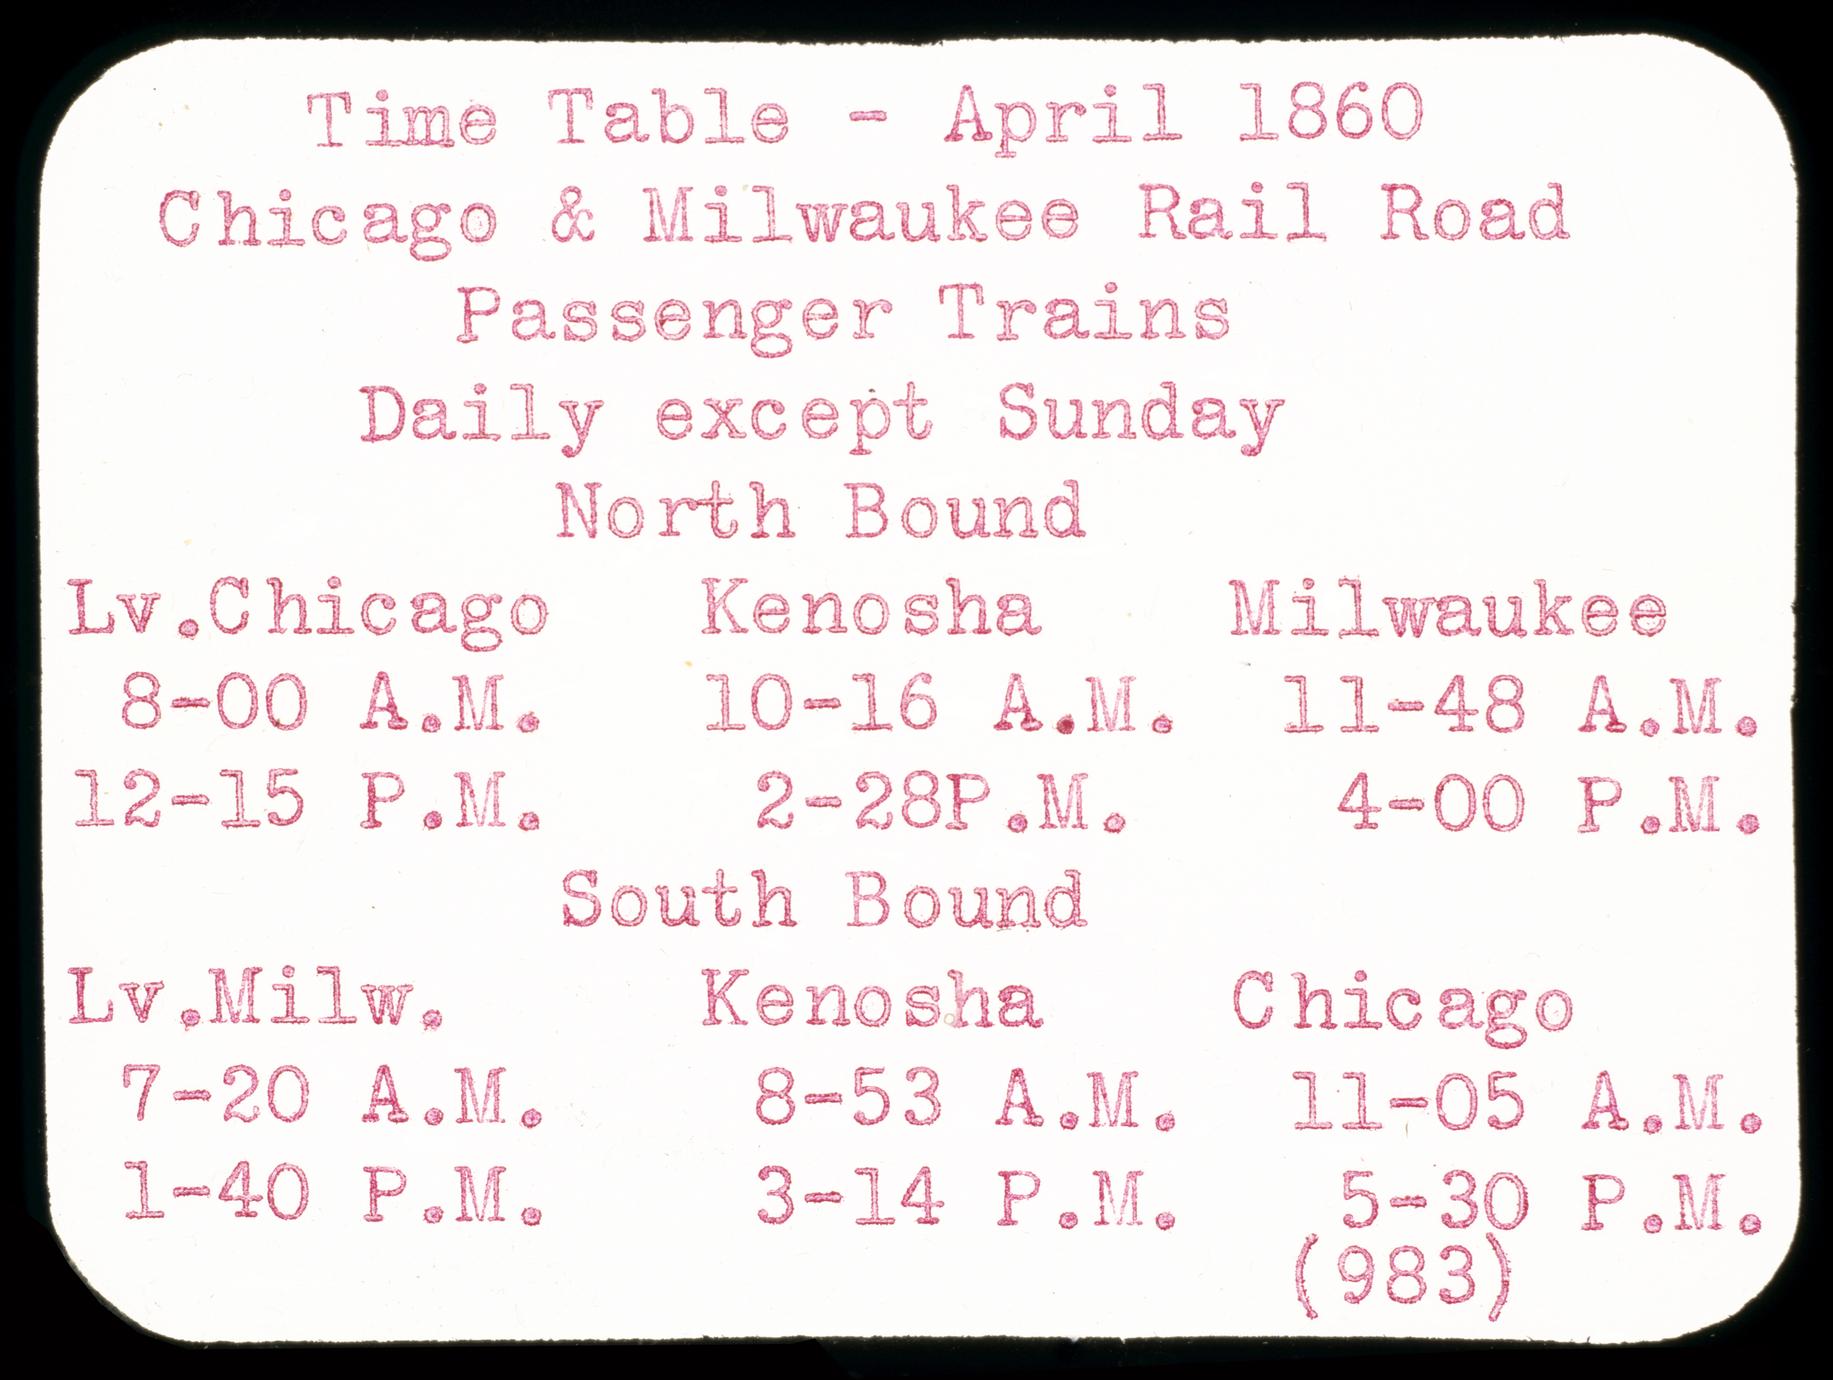 Time table, Chicago and Milwaukee Railroad